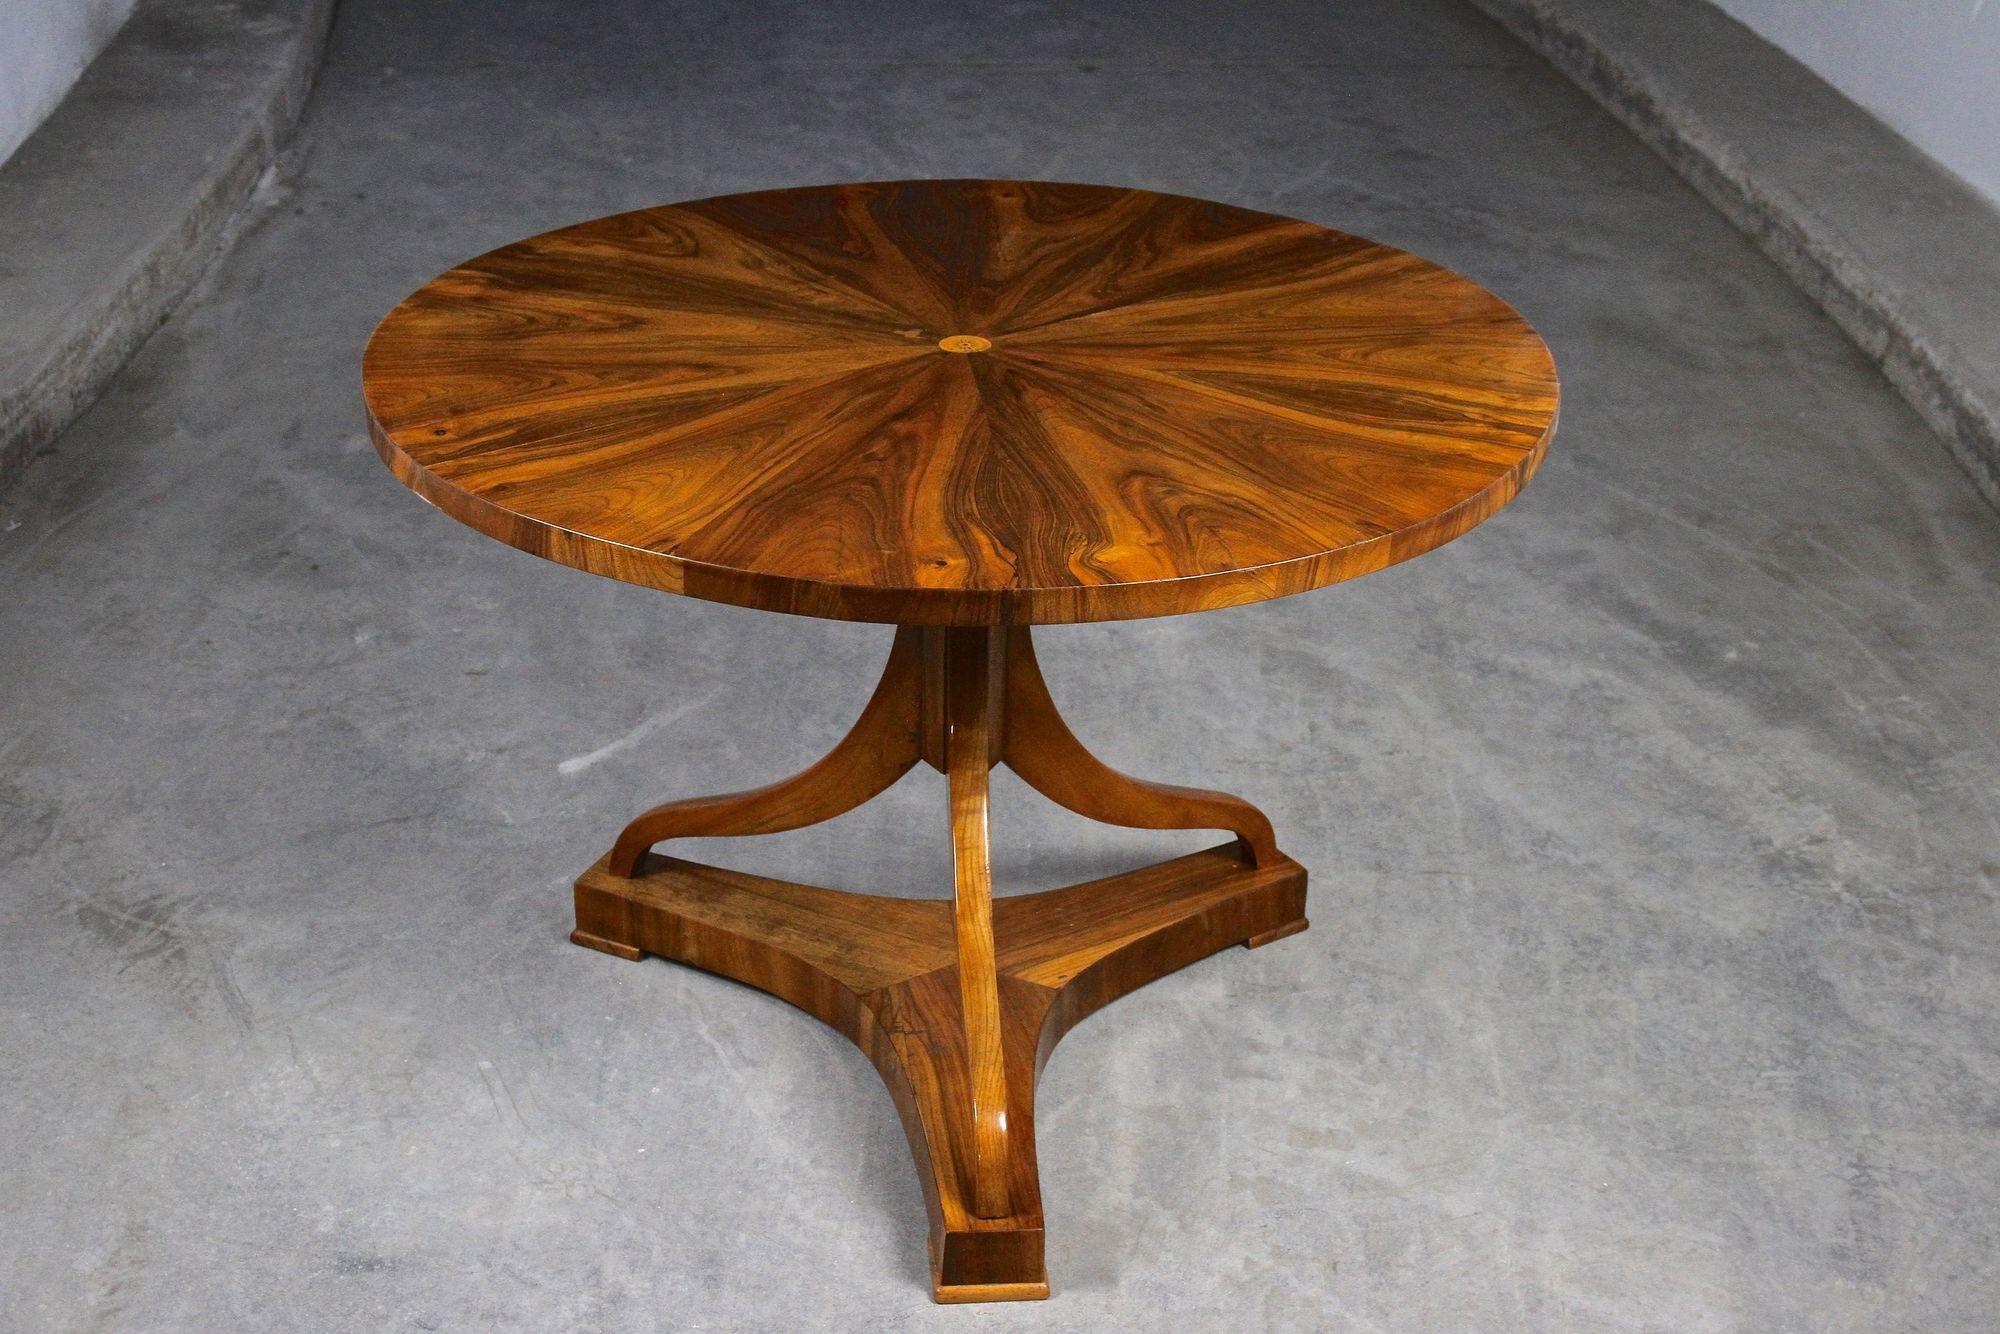 Striking round early 19th century Biedermeier dining table or coffee table coming from the famous period in Vienna / Austria. Elaborately crafted around around 1830, this gorgeous round antique Biedermeier table impresses with an amazing looking